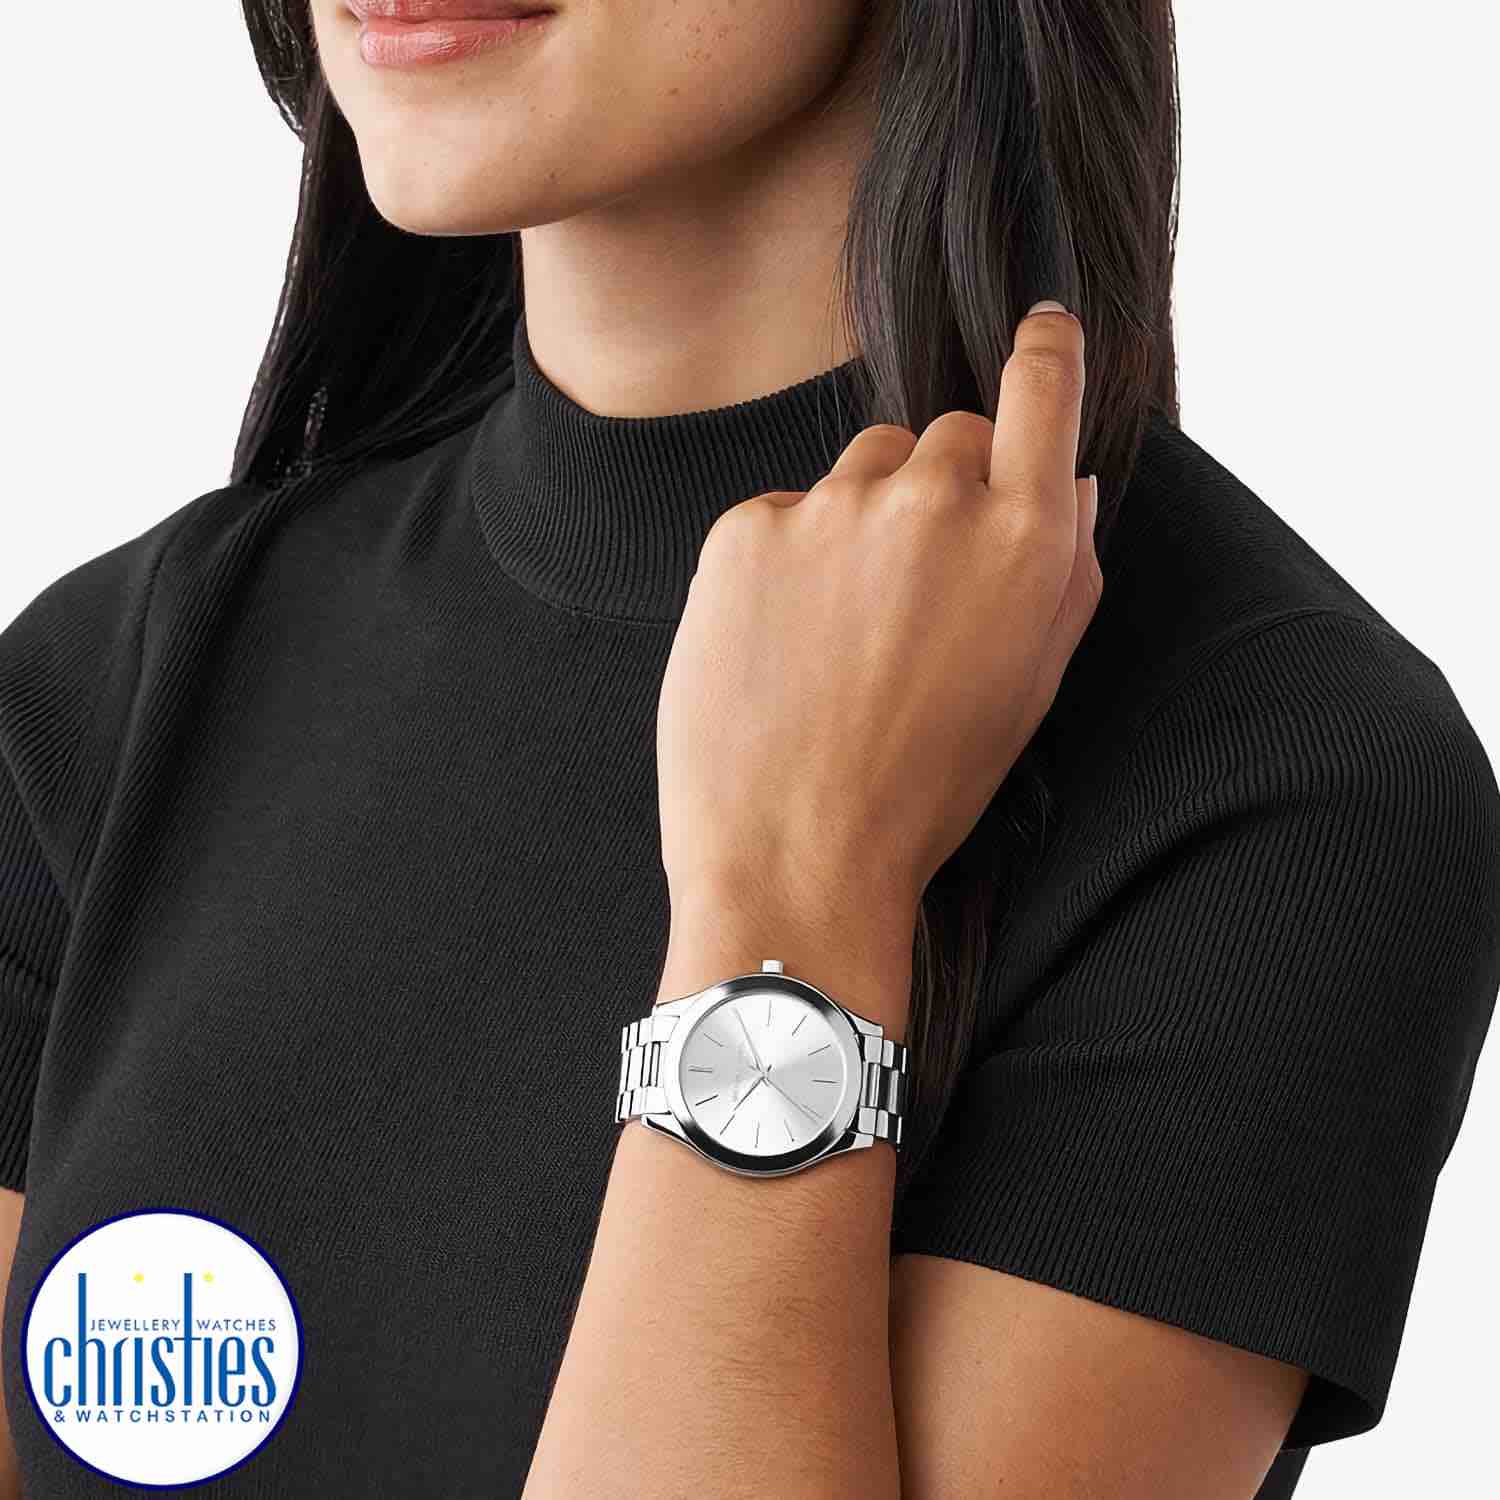 MK3178 Michael Kors Slim Runway Silver Watch.   A perennial favourite, Michael Kors iconic Slim Runway watch is designed in silver tone stainless steel and features a sleek, understated dial for a modern touch. Stack it with an arm full of bracelets for y